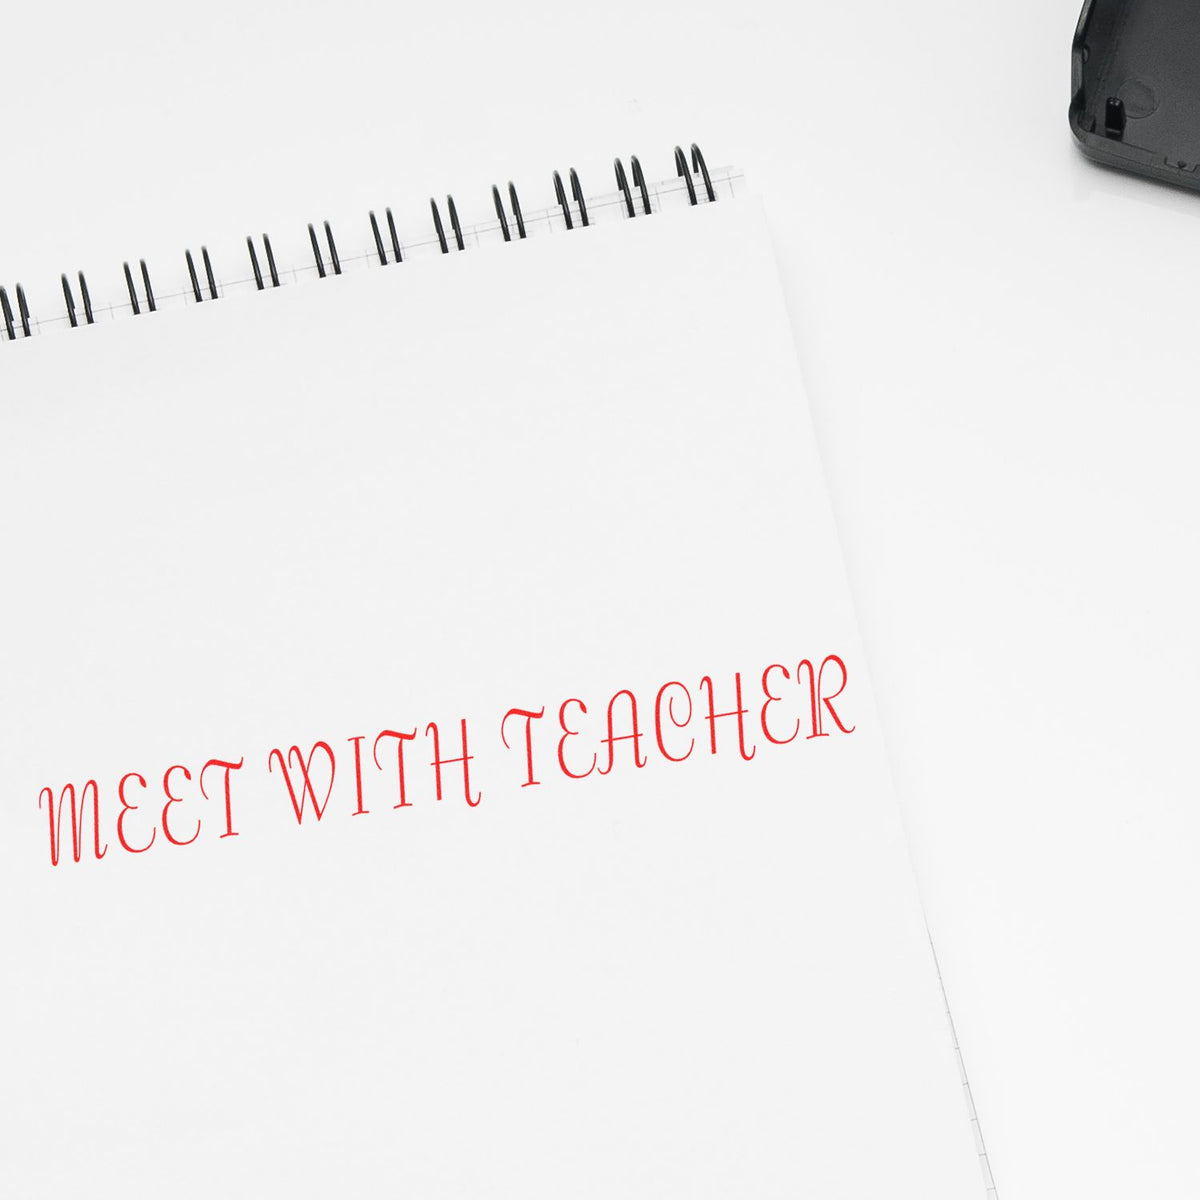 Meet With Teacher Rubber Stamp In Use Photo